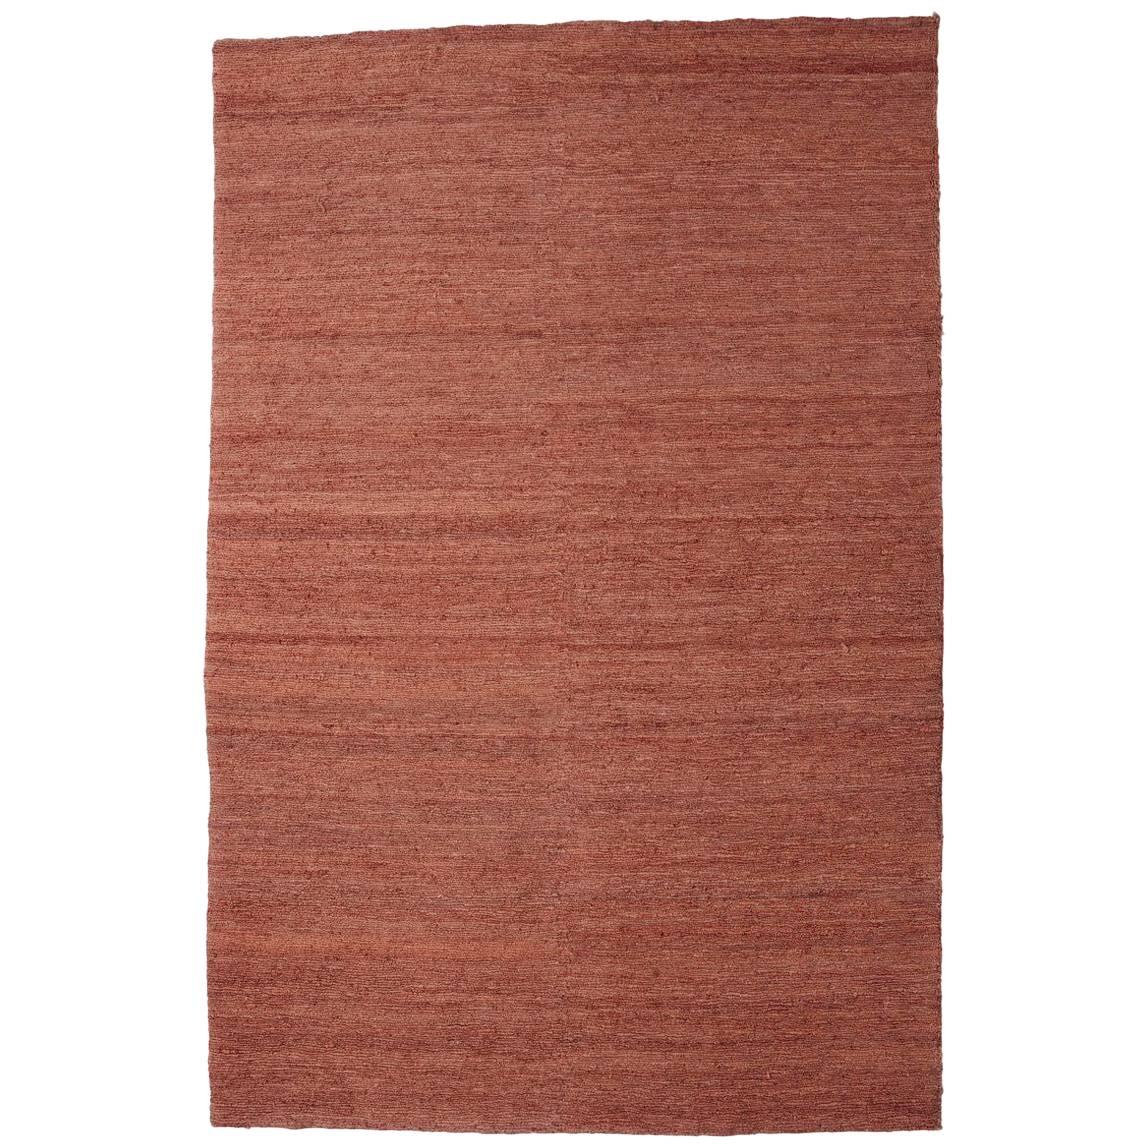 Terracotta Hand-Knotted Jute Earth Rug by Nani Marquina & Ariadna Miquel, Small For Sale